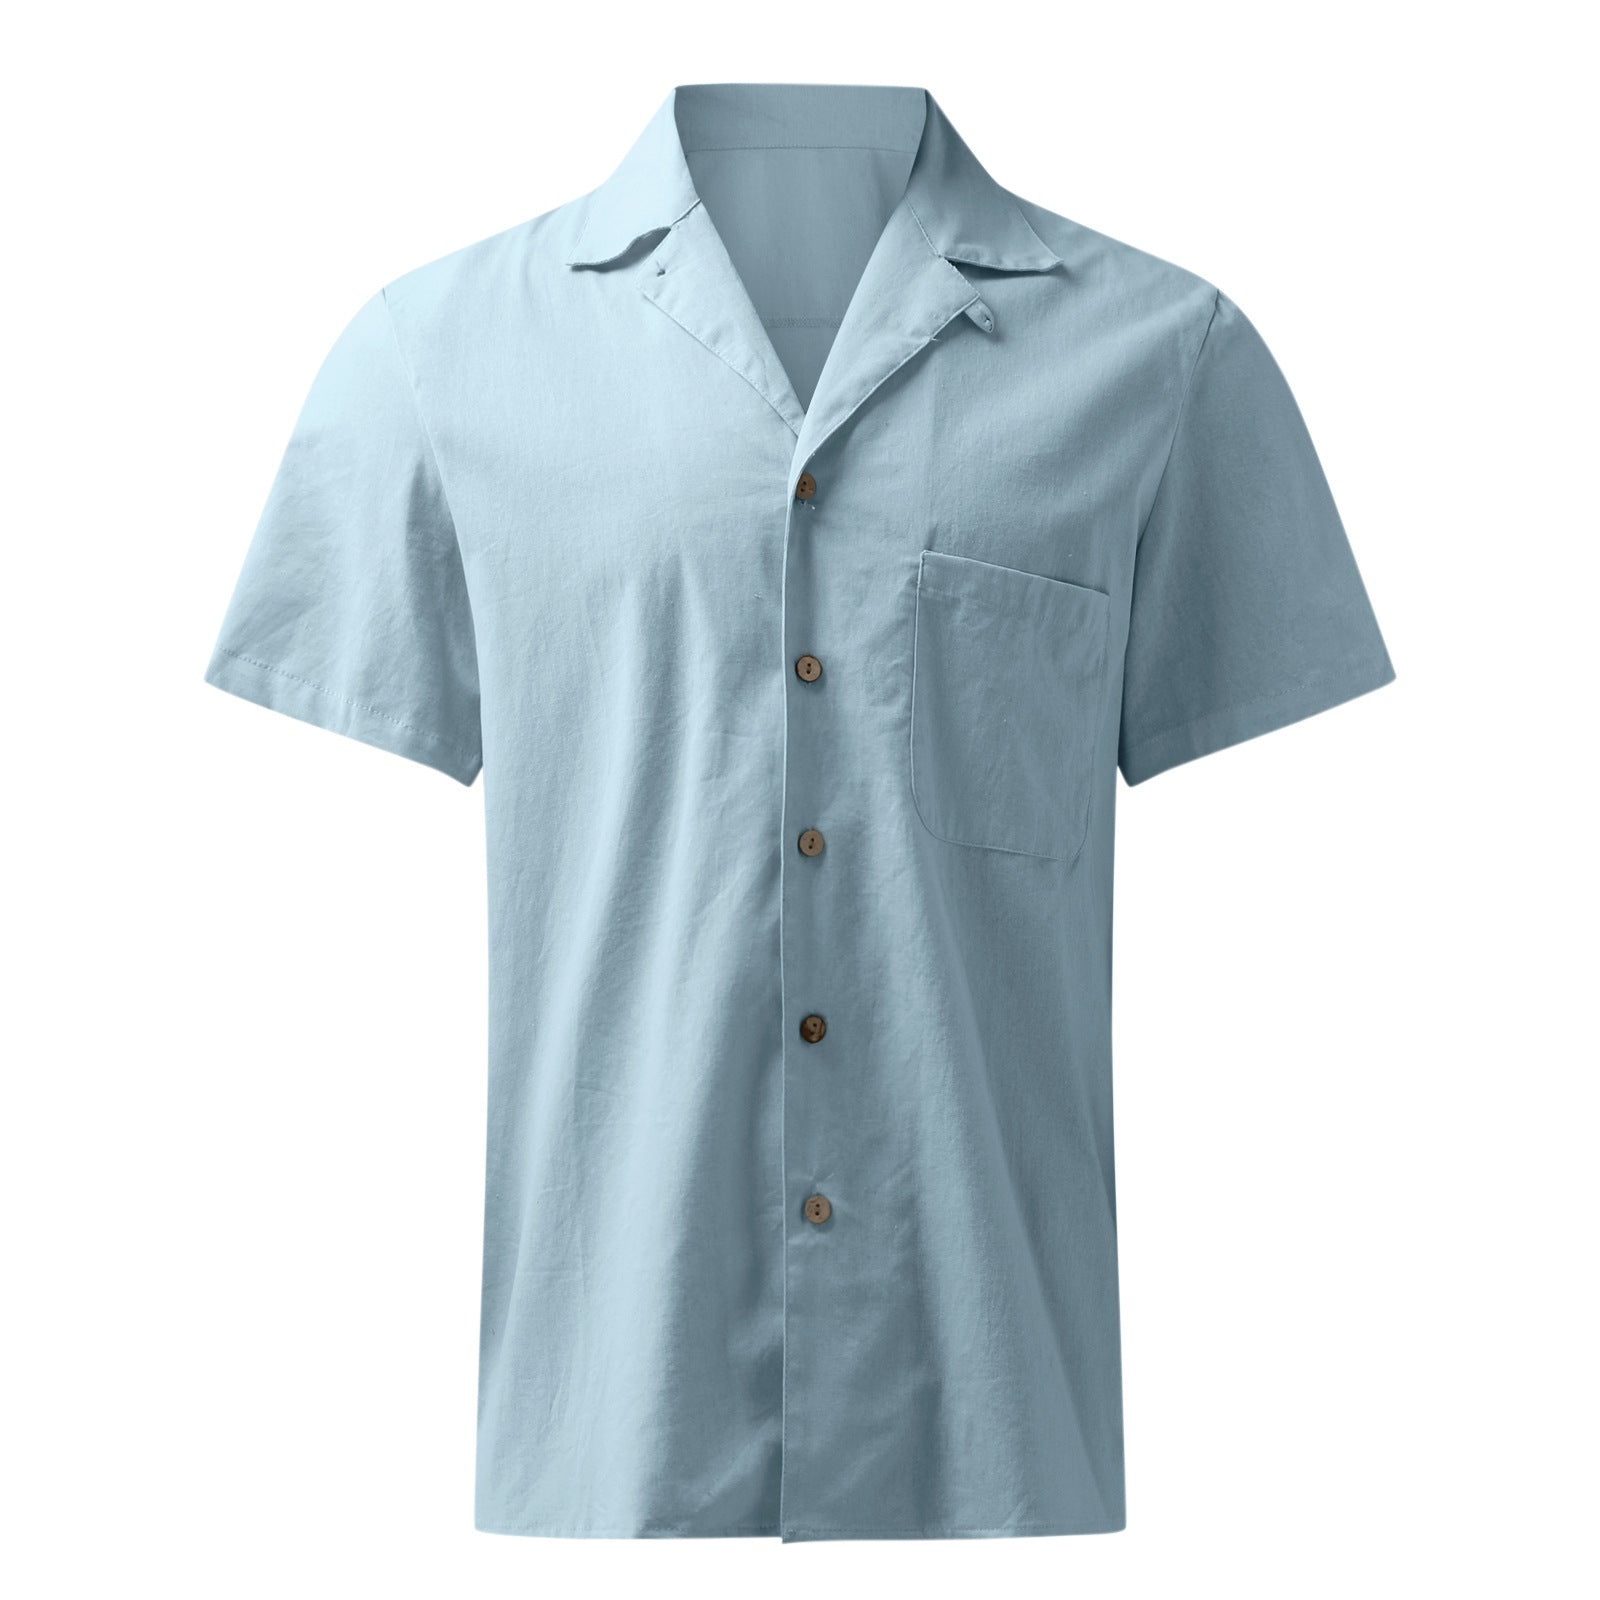 Casual Linen Short Sleeves Shirts for Men-Shirts & Tops-Light Blue-S-Free Shipping at meselling99